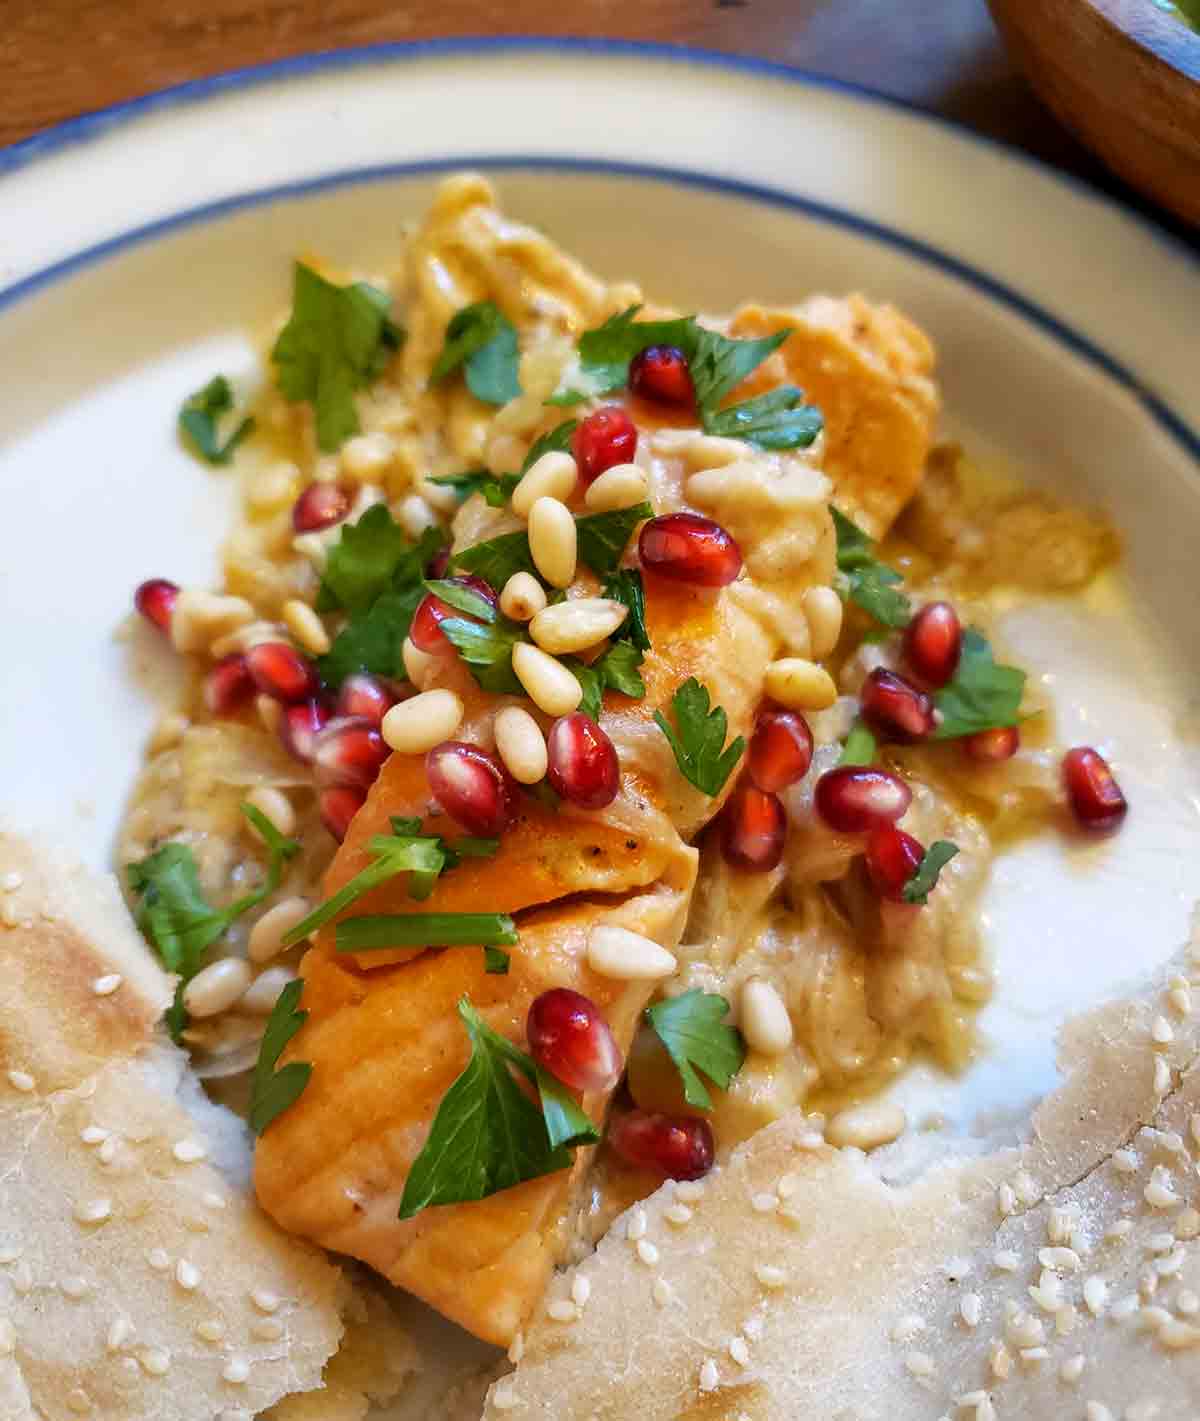 A piece of pan seared salmon with sweet tahini sauce, garnished with pine nuts, pomegranate seeds, and parsley on a white plate.